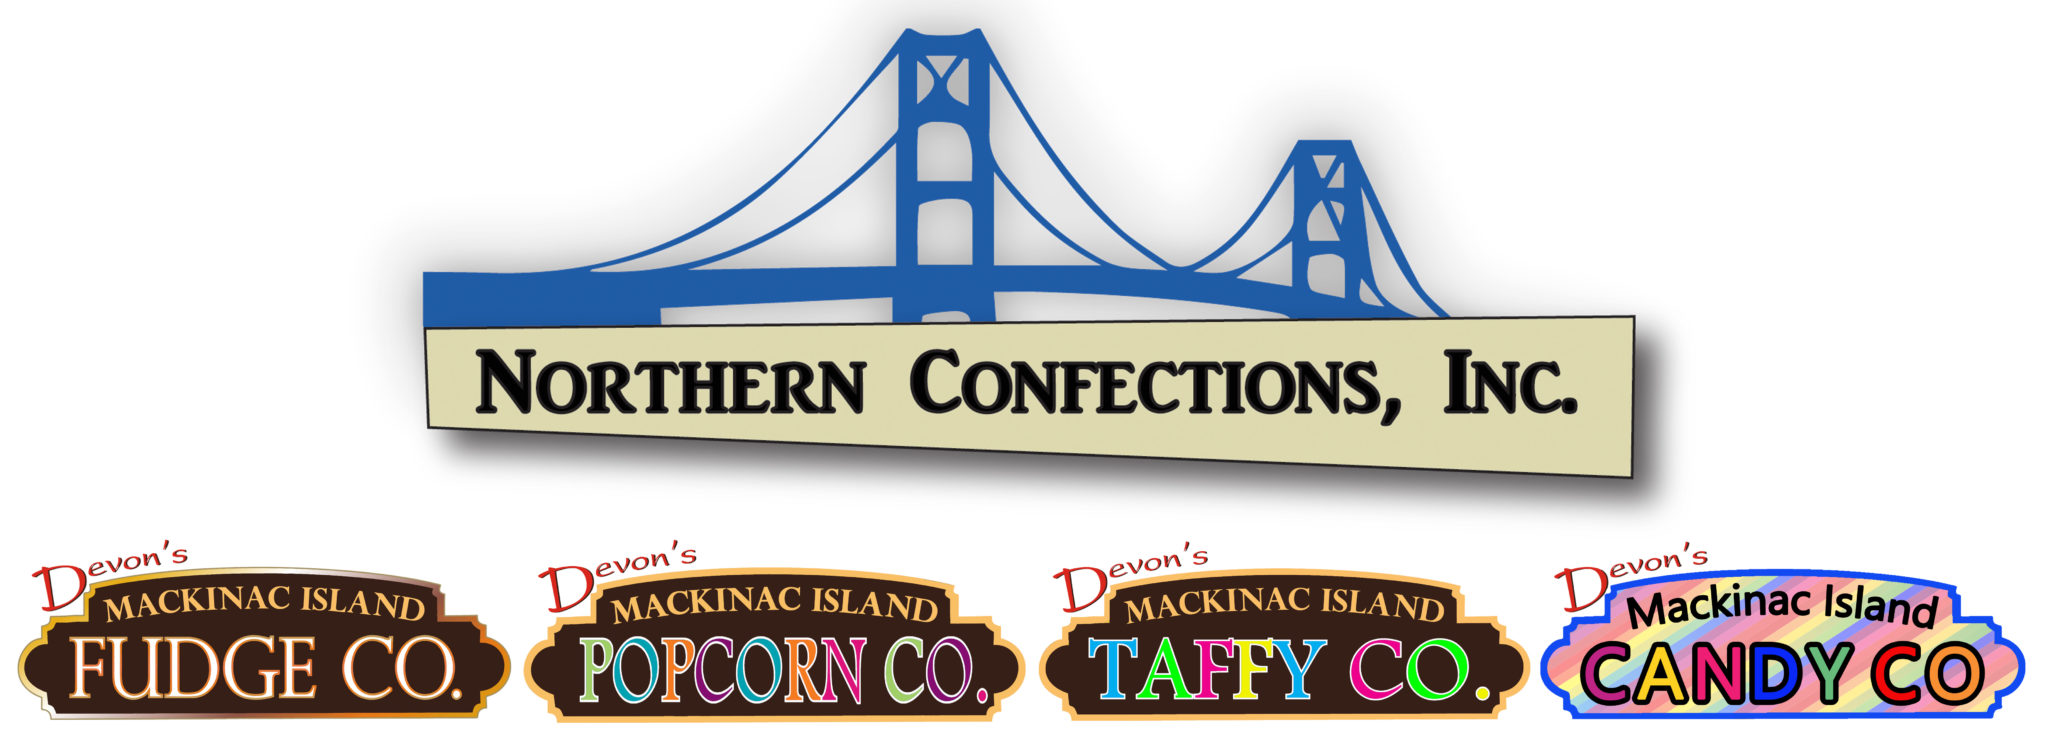 Northern Confections